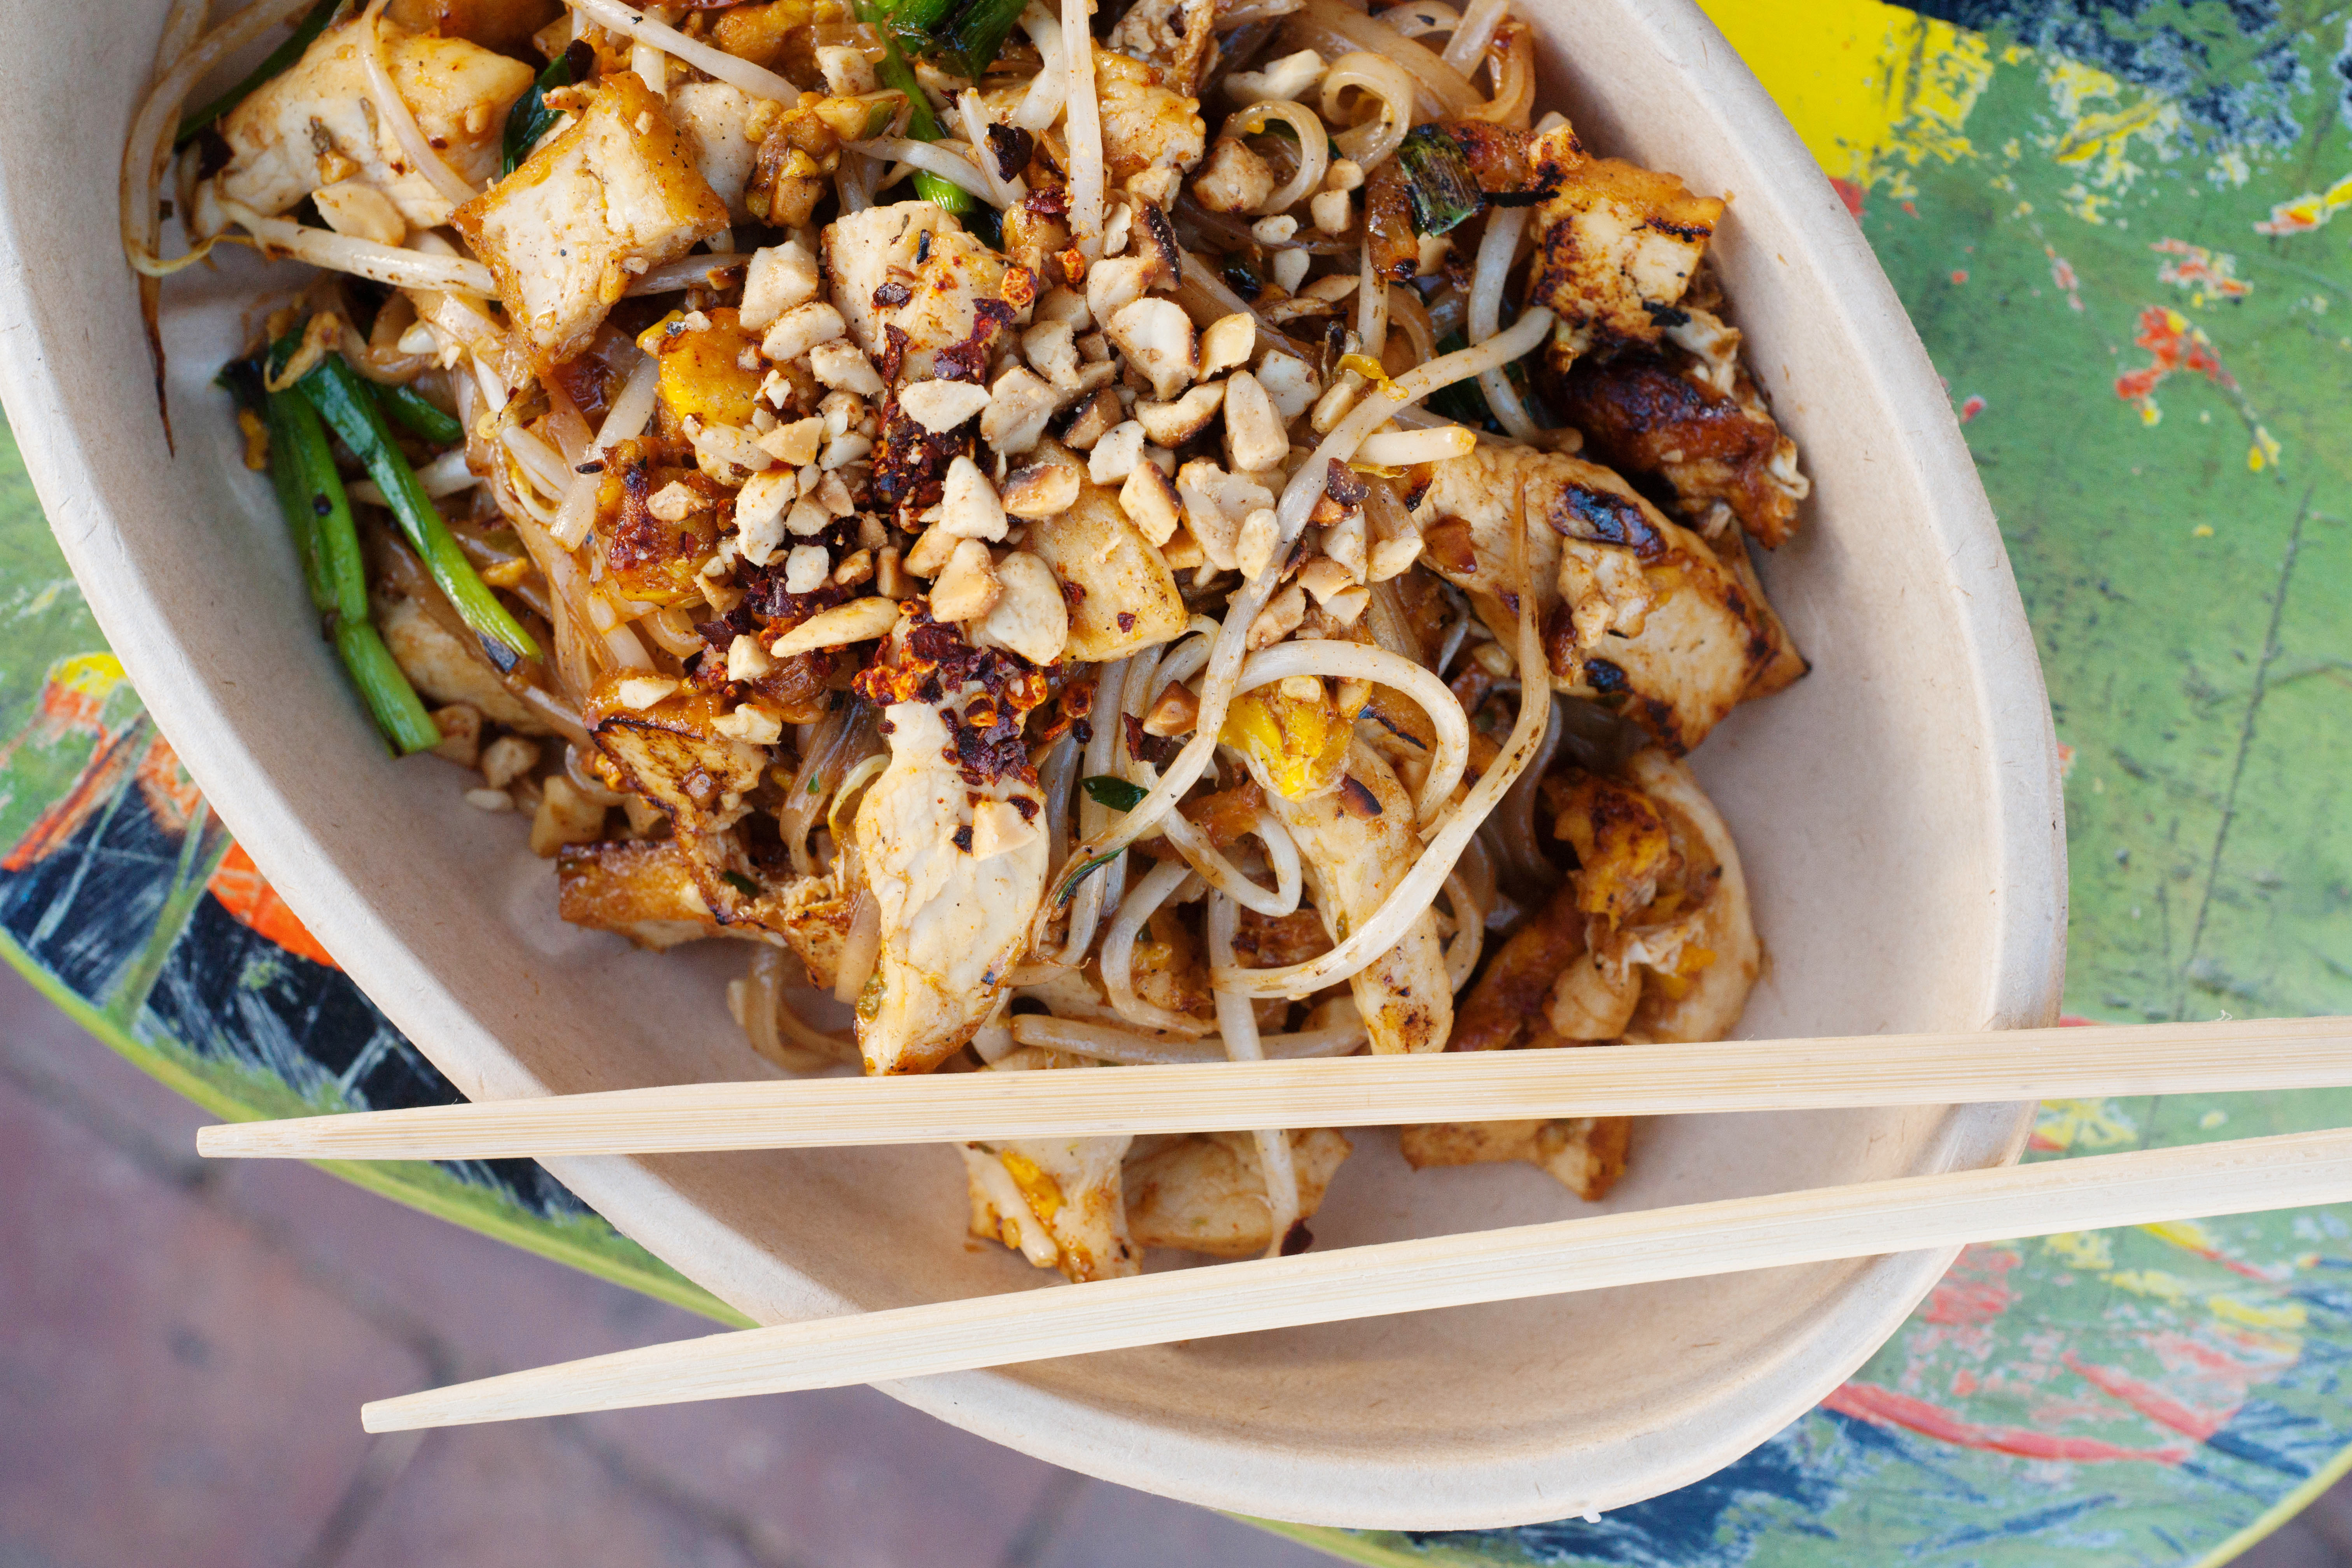 In a paper bowl, a dish of pad thai sits. A pair of chopsticks rest on the rim.